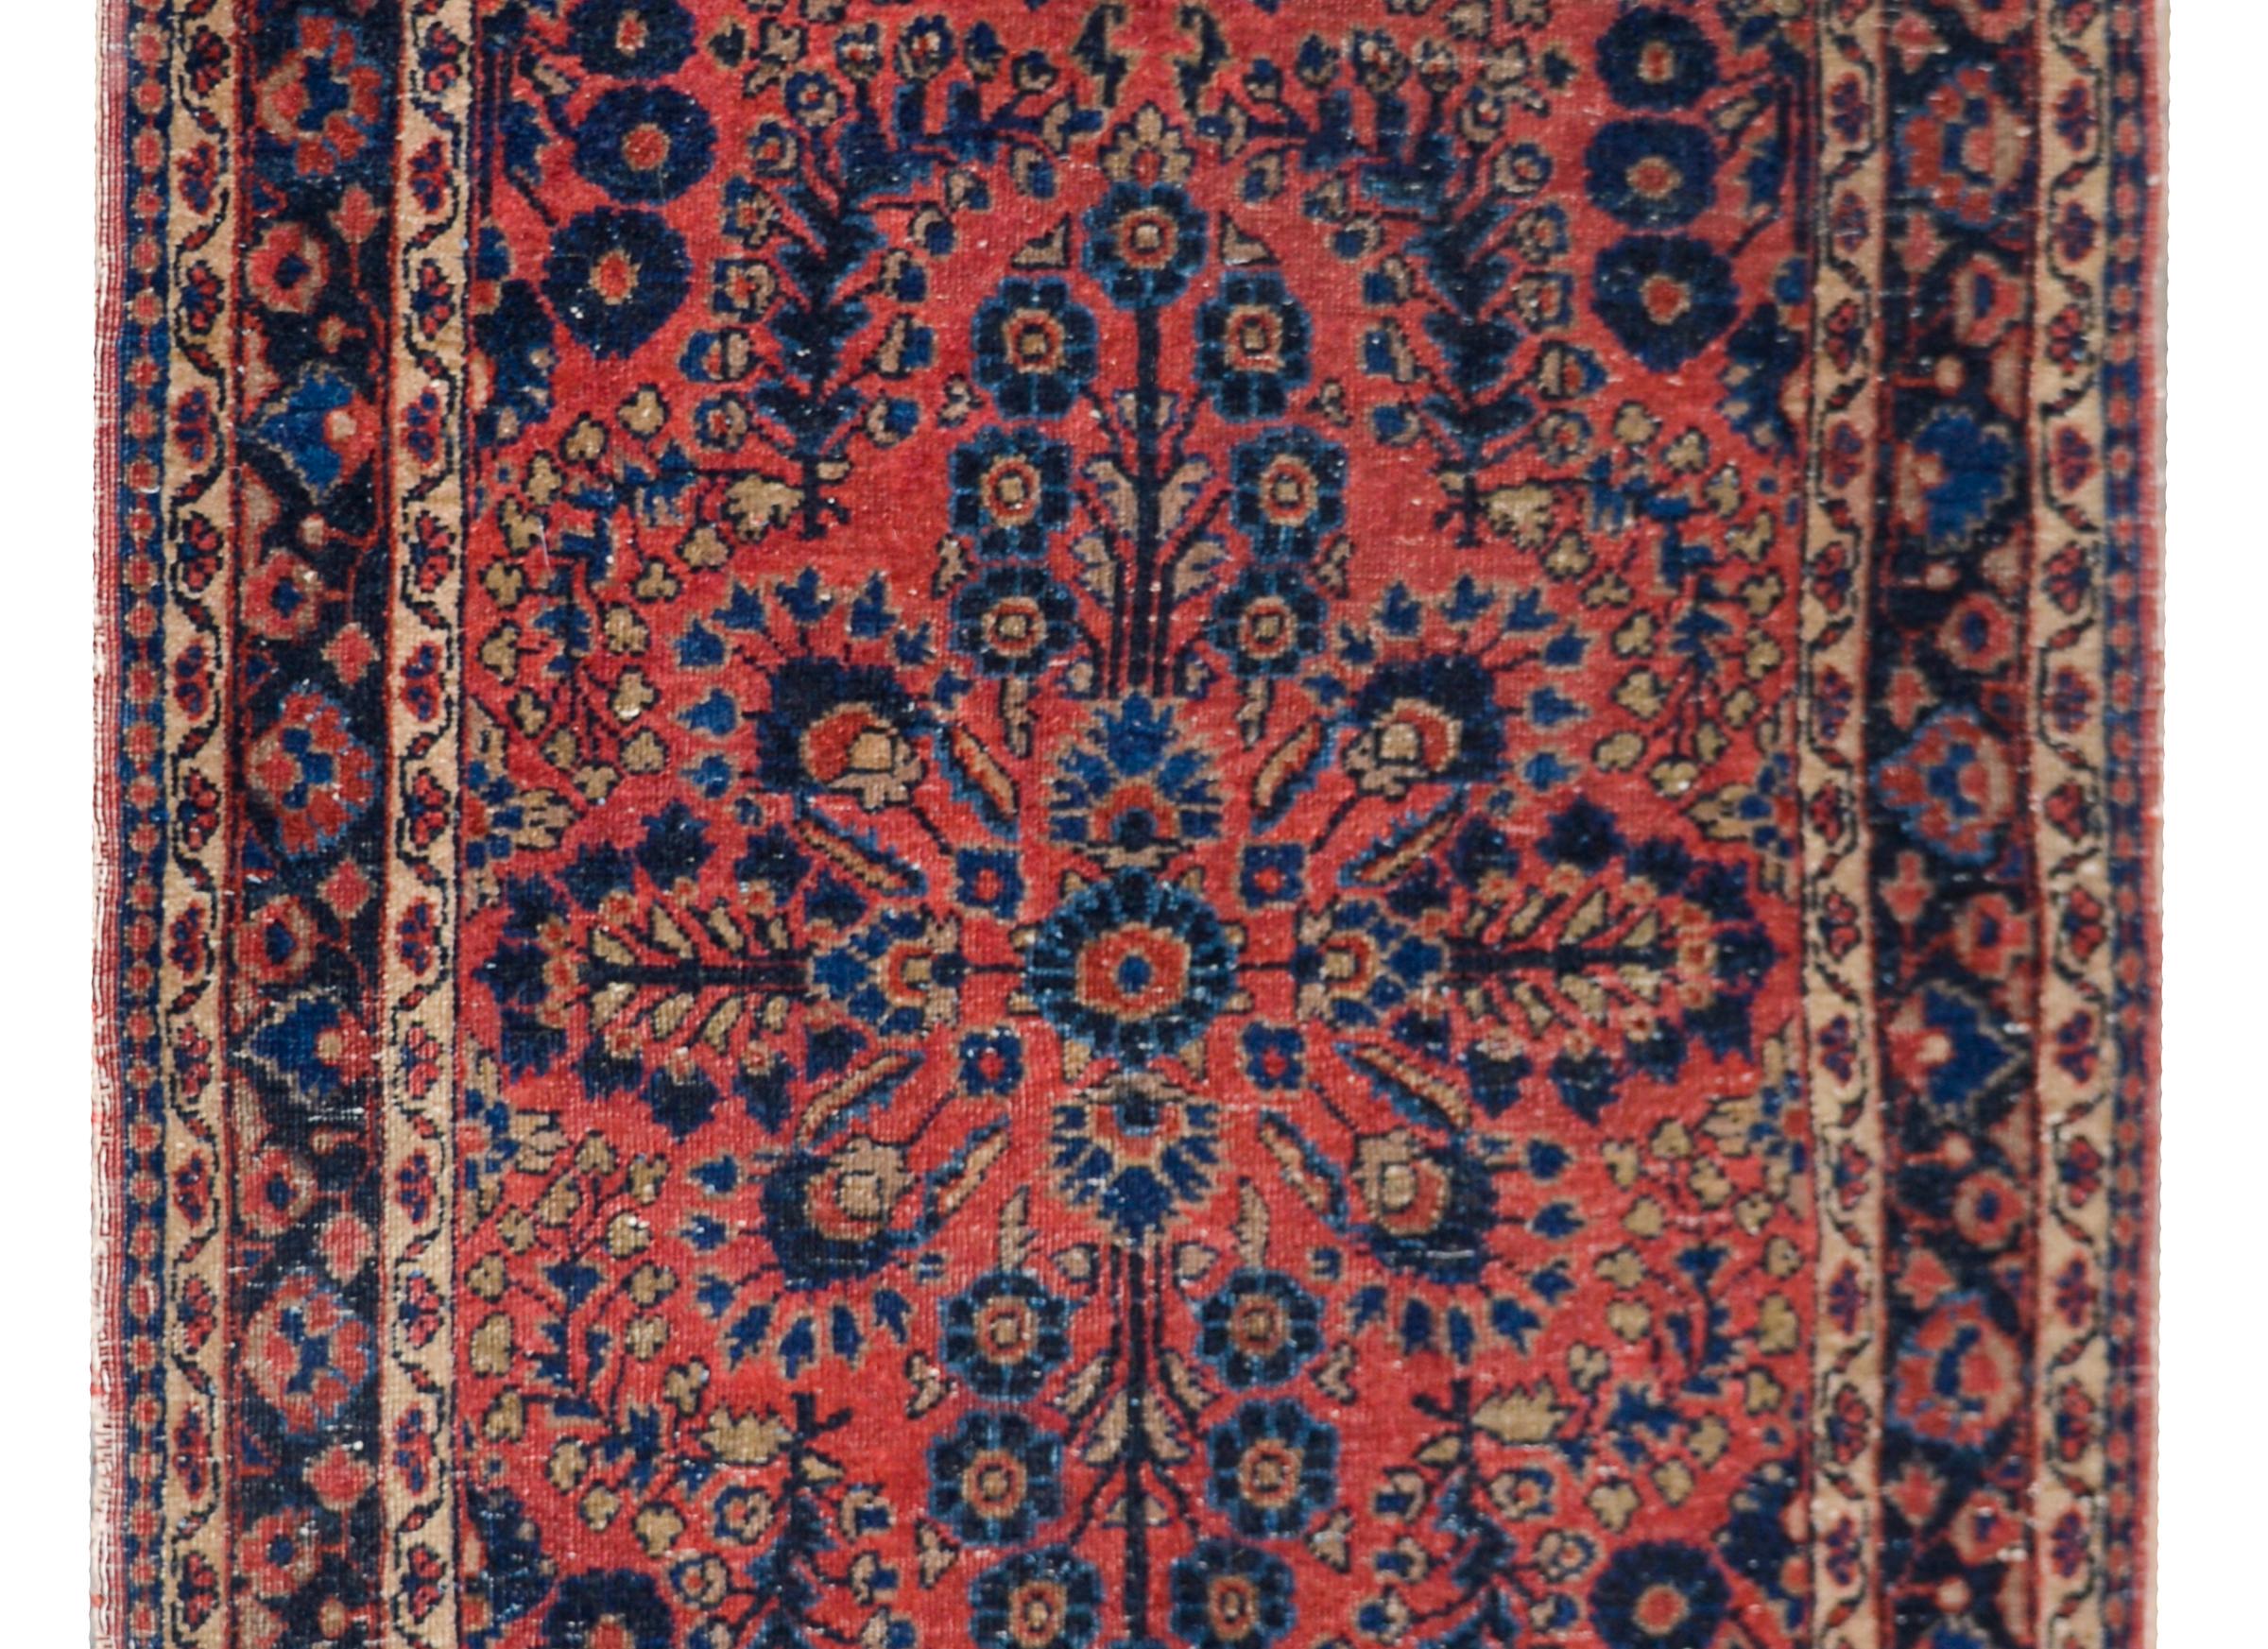 A beautiful early 20th century Persian Sarouk rug with a traditional mirrored floral pattern woven with myriad floral and scrolling vine clusters and surrounded by a border containing several petite floral pattered stripes, and all woven in light